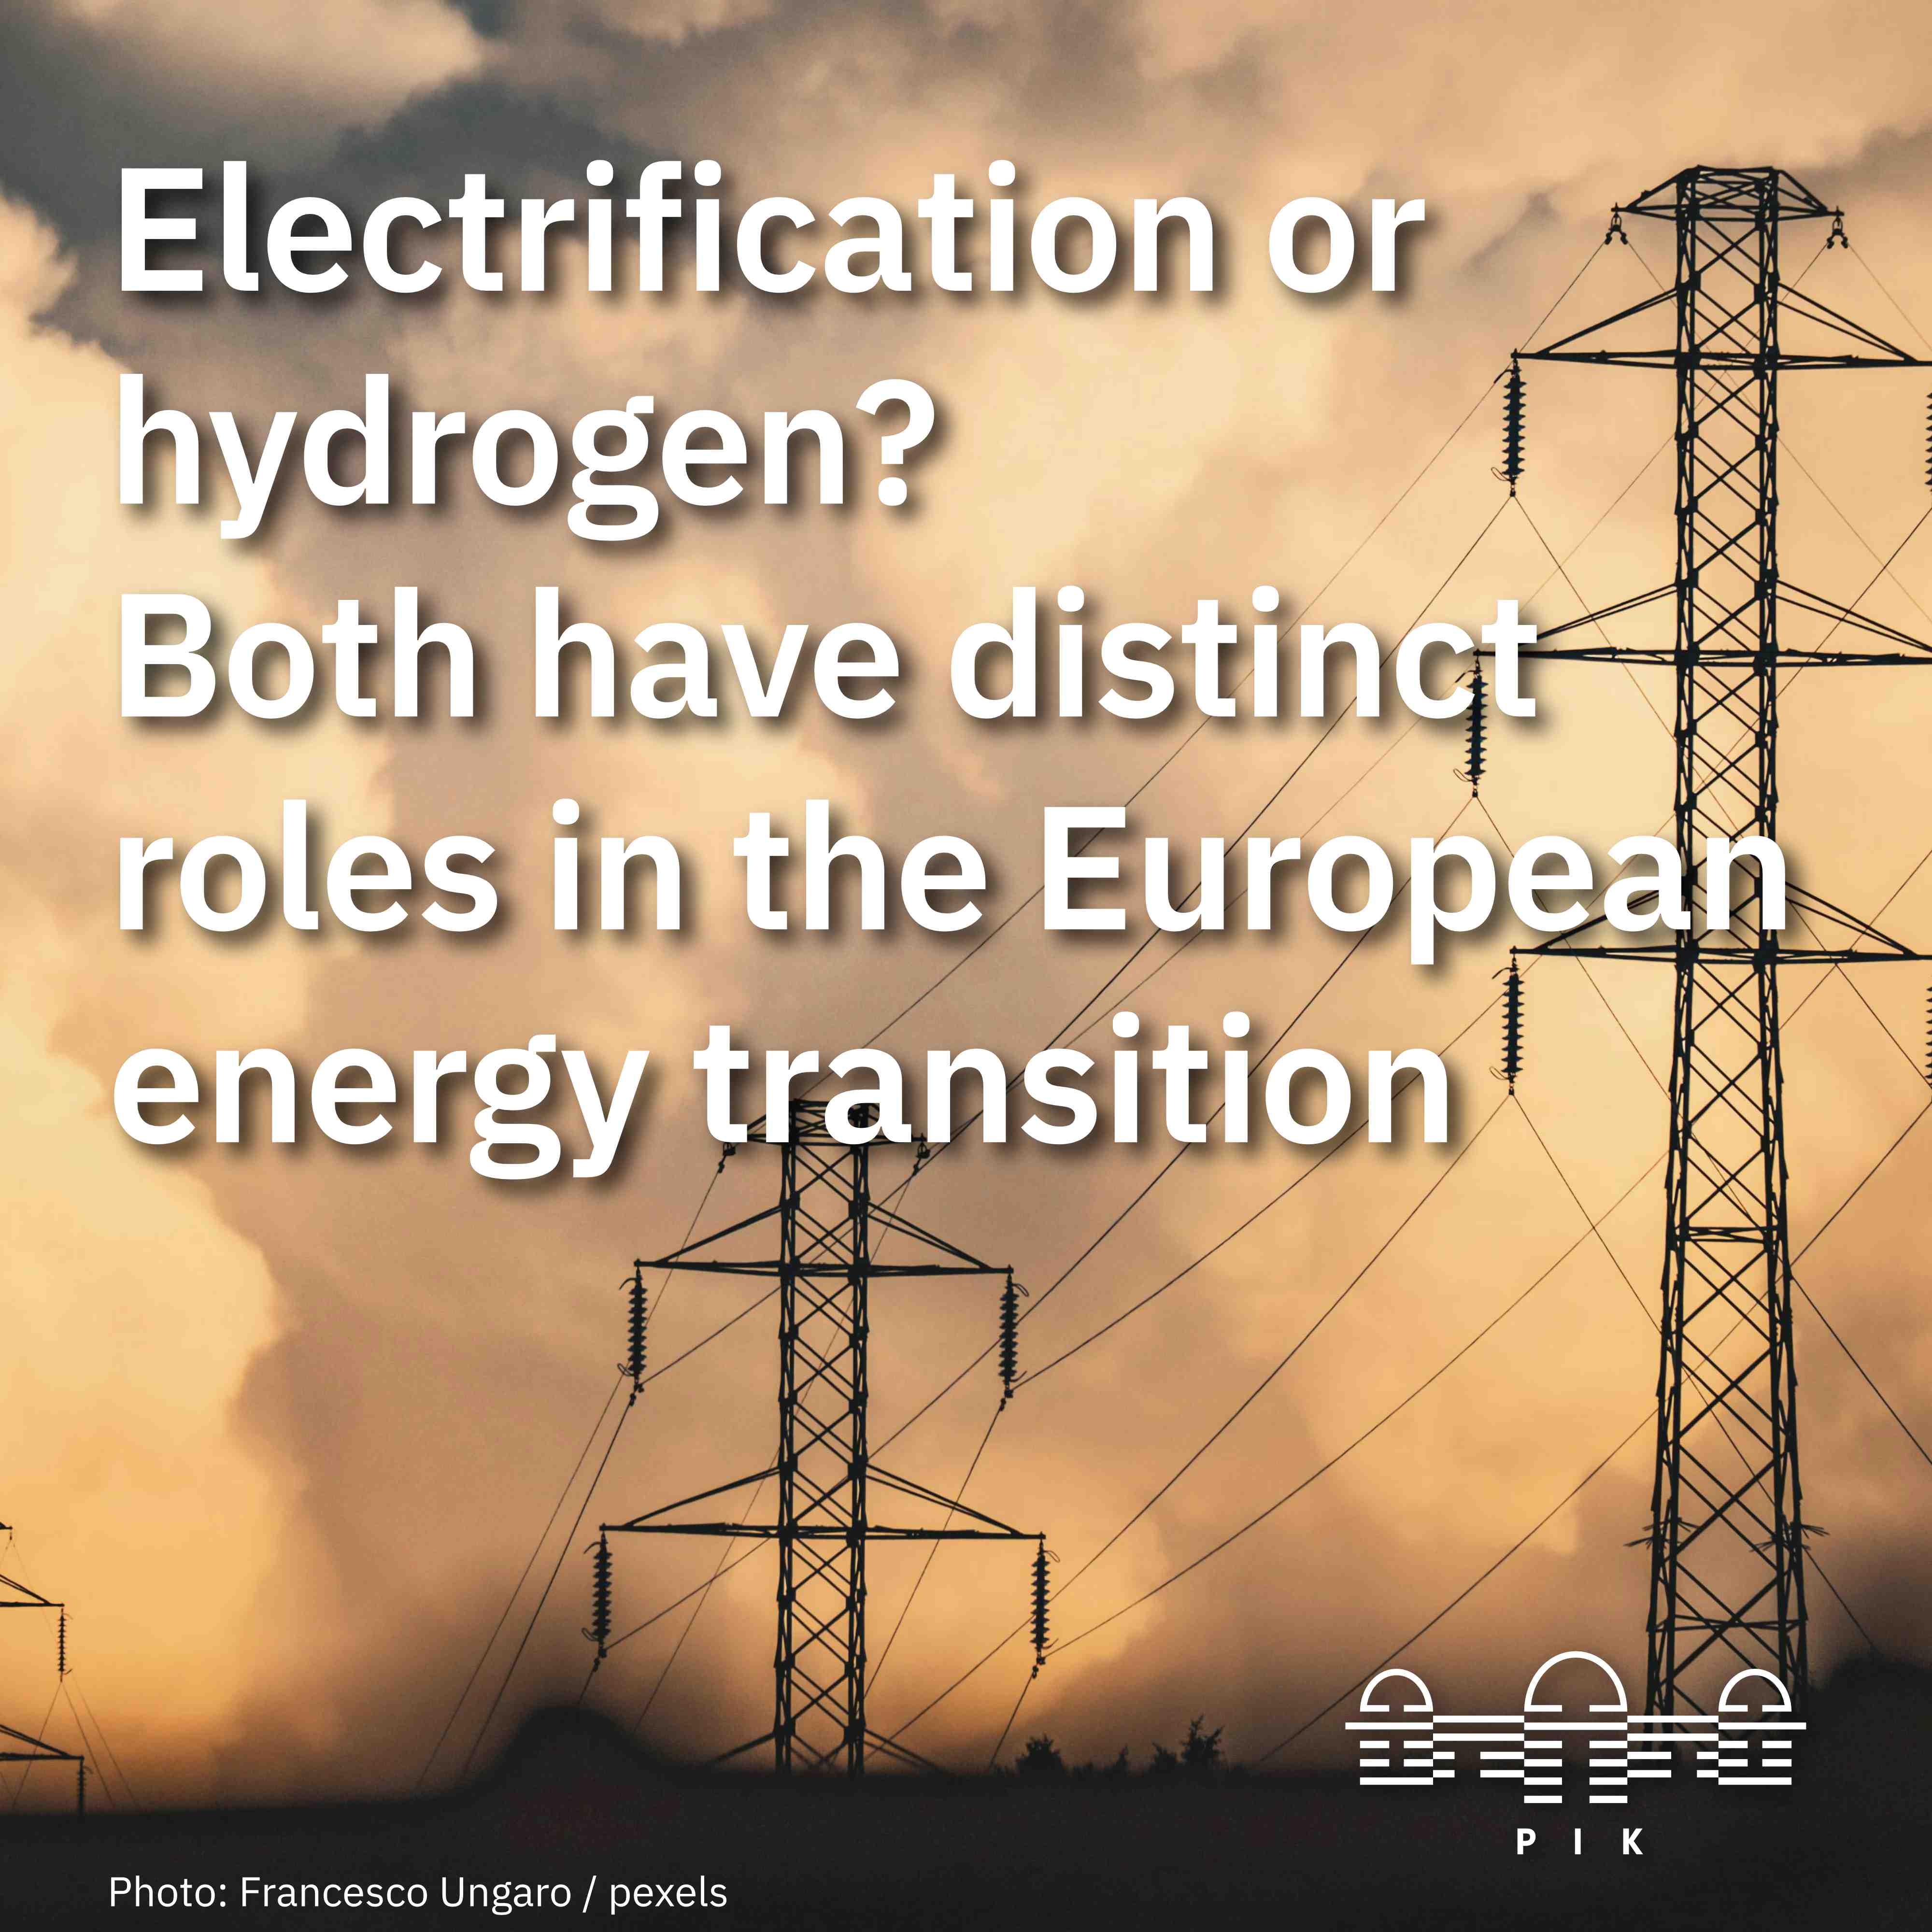 Electrification and hydrogen in the European energy transition